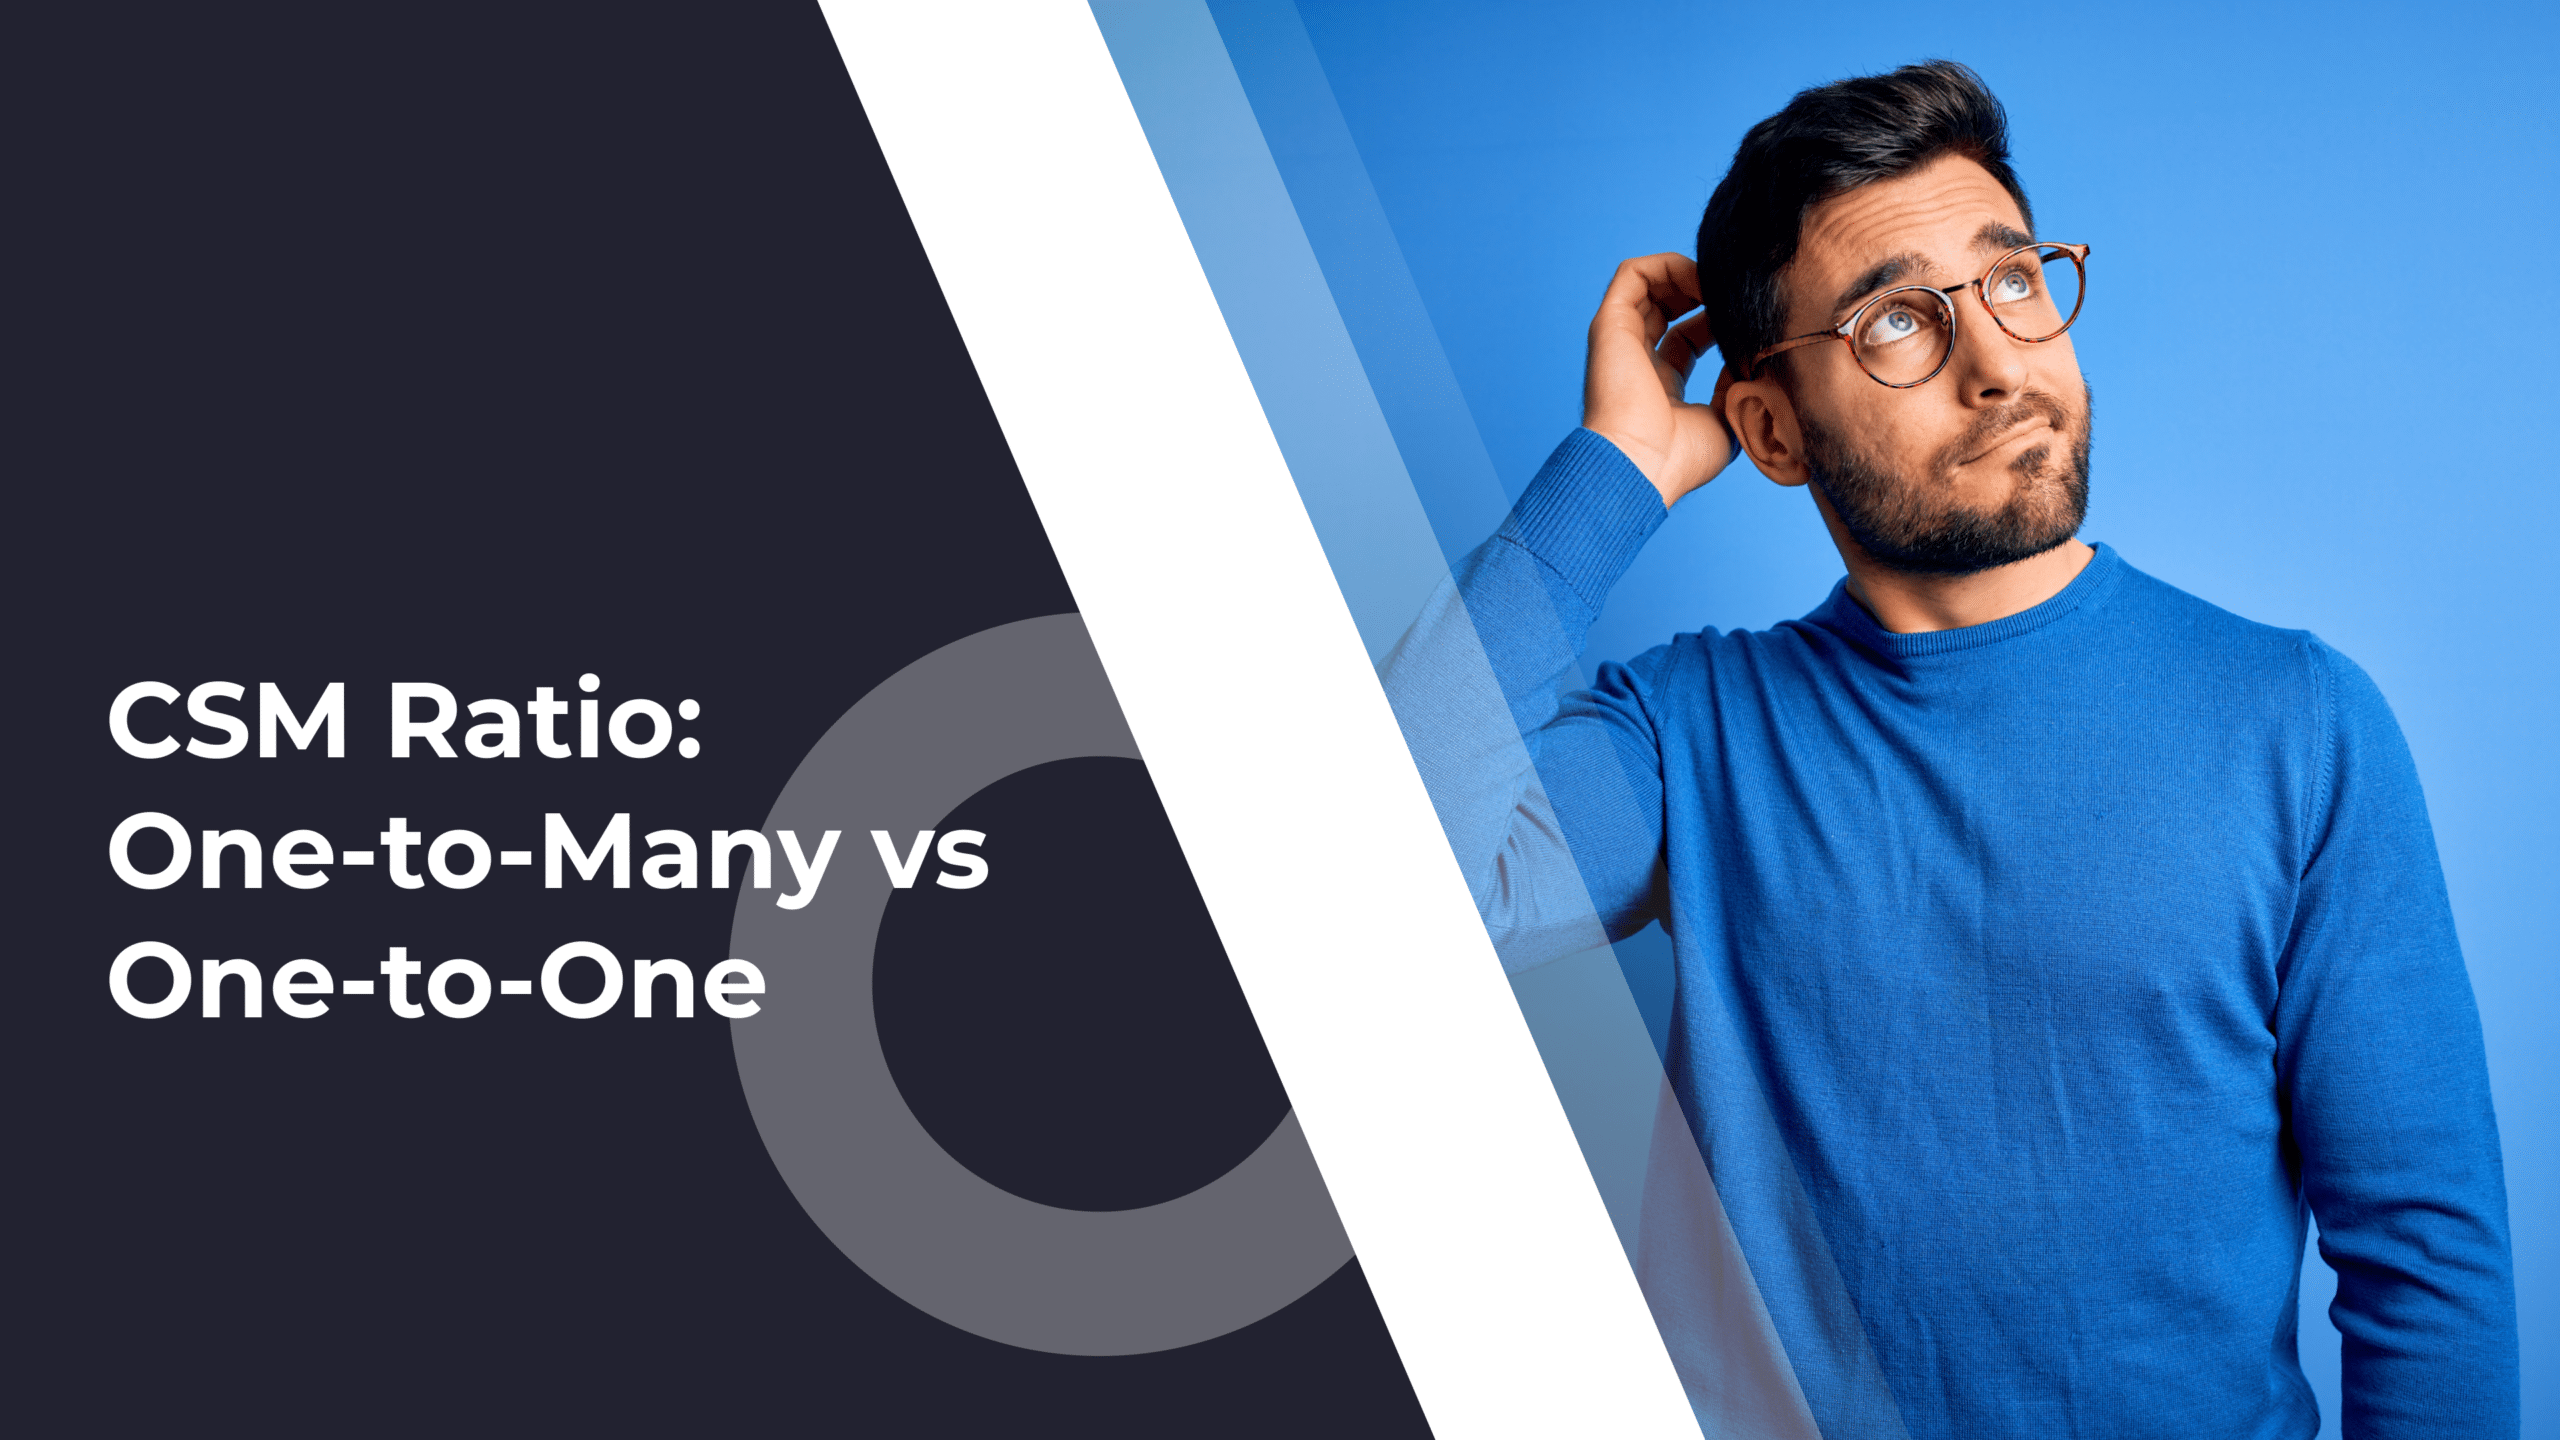 CSM Ratio: One-to-Many vs One-to-One vs Many-to-One vs Many-to-Many